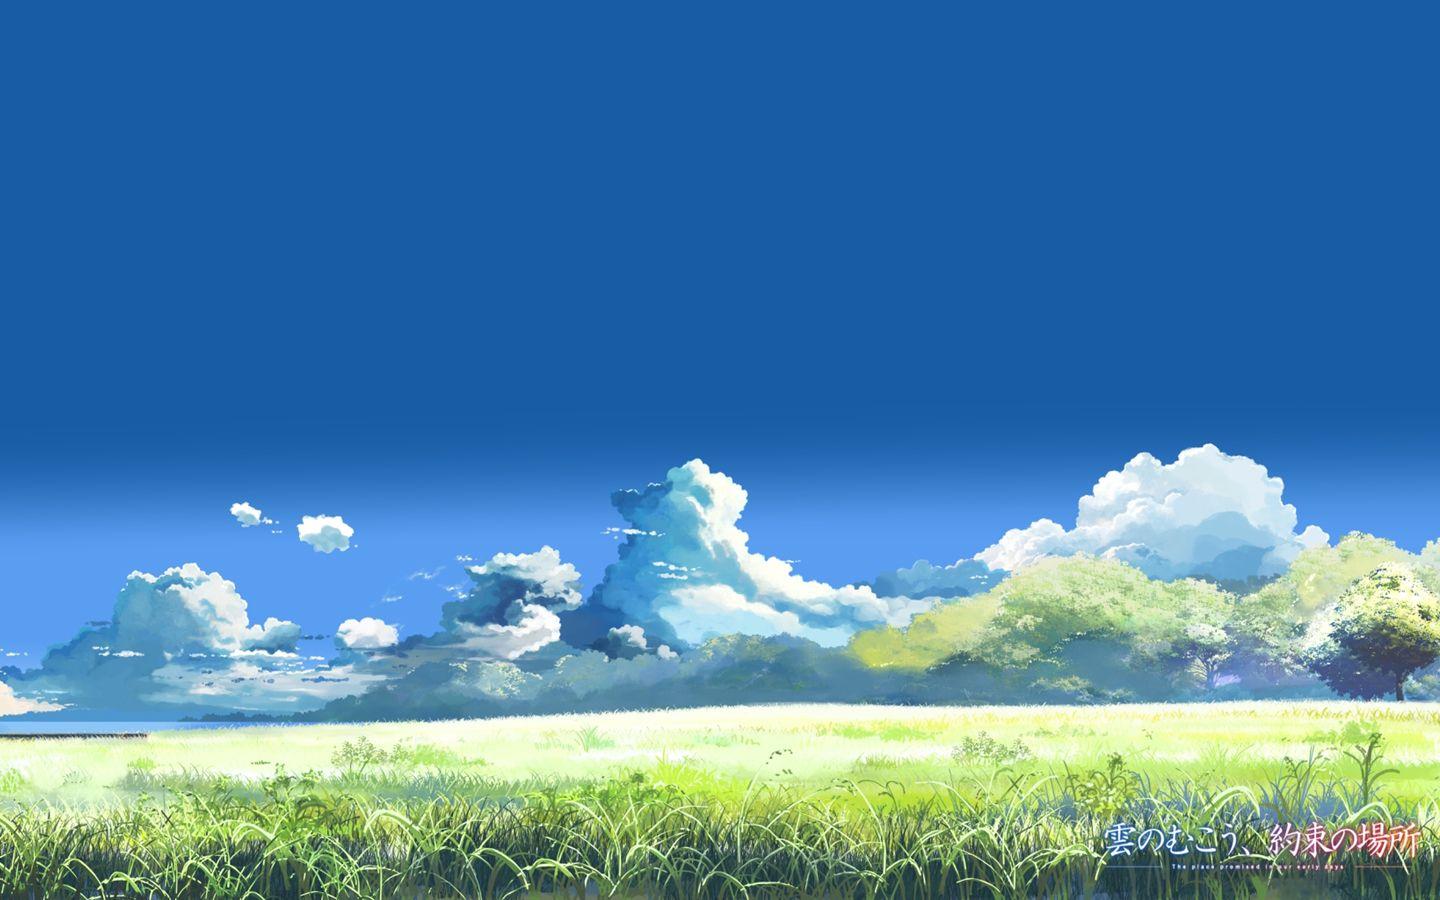 Makoto Shinkai placed promised in our early days